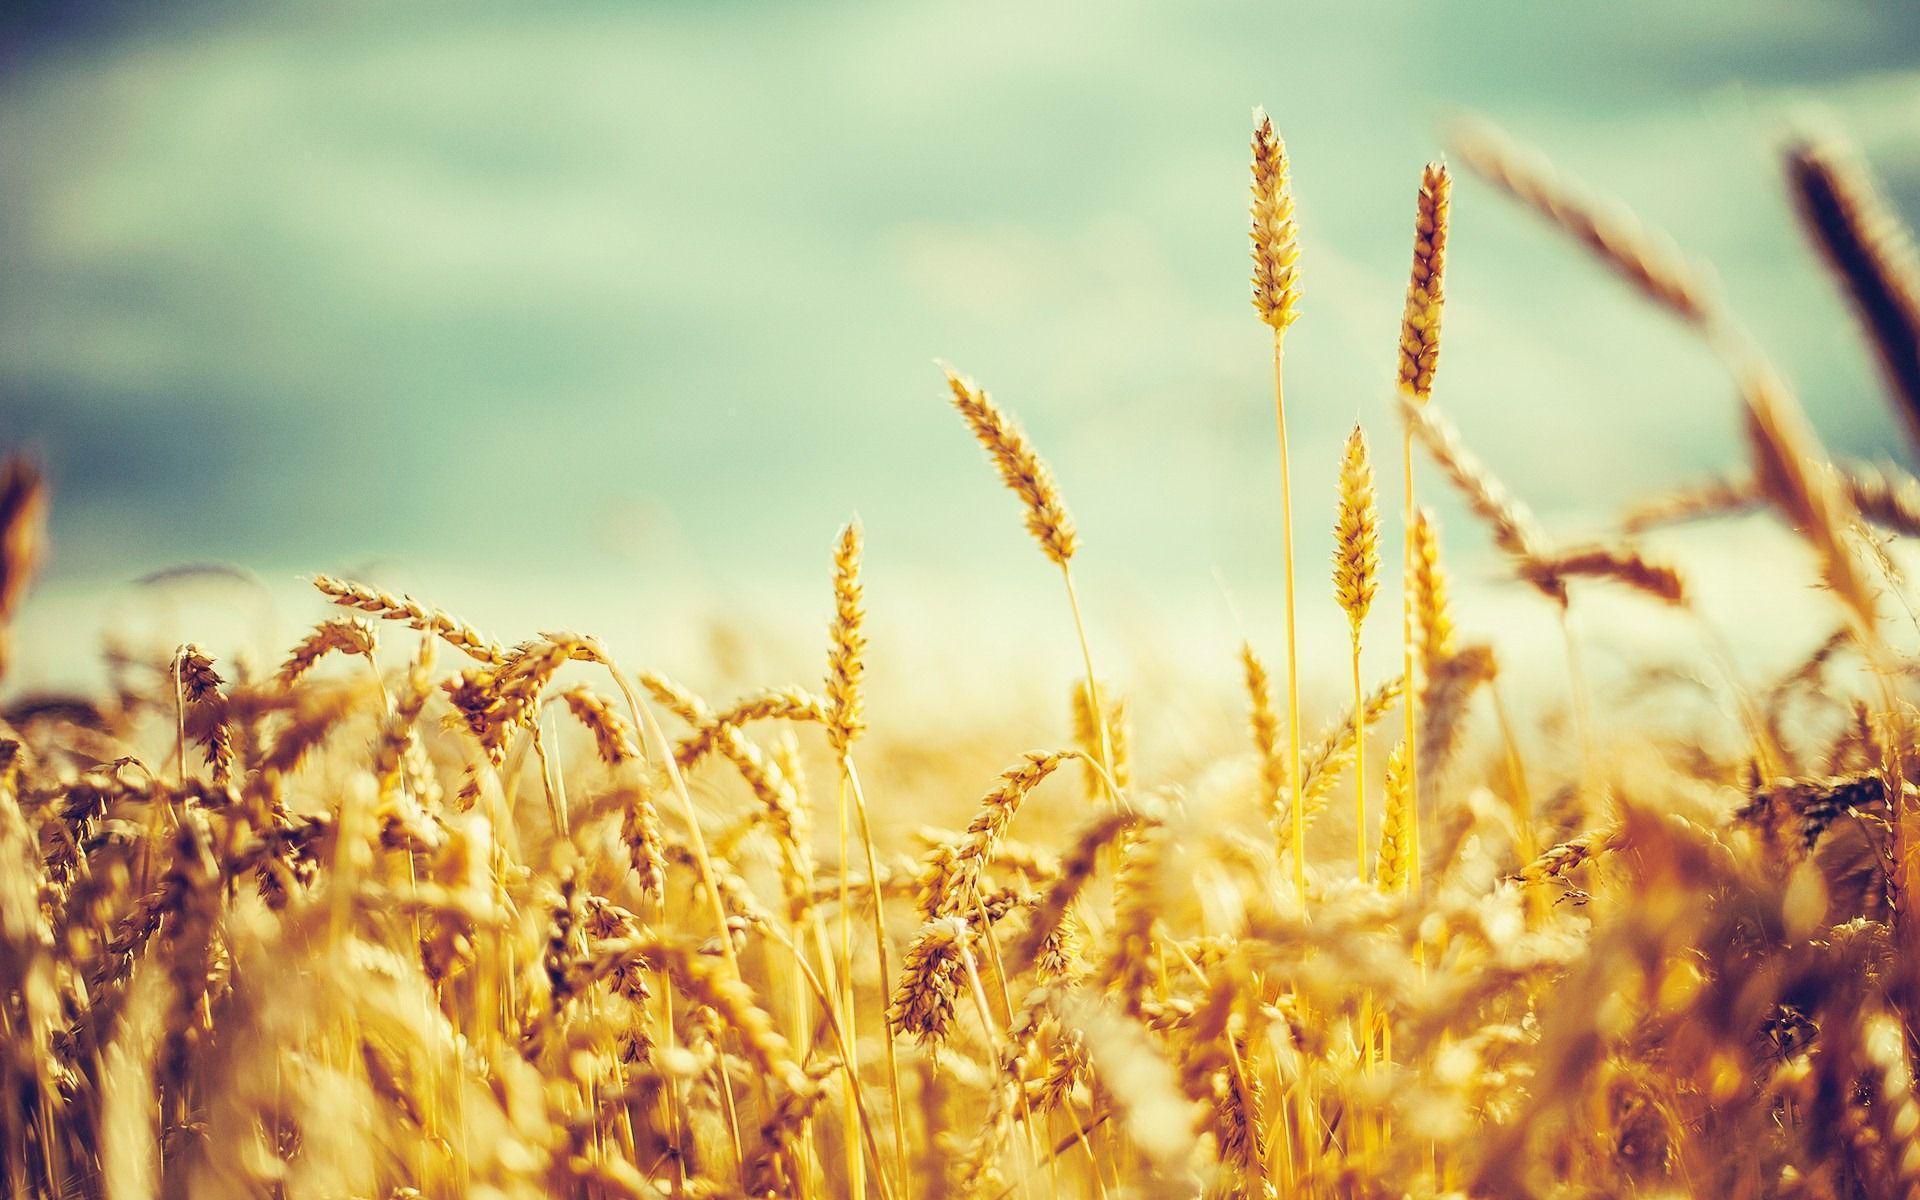 Wheat Wallpapers, HDQ Beautiful Wheat Image & Wallpapers